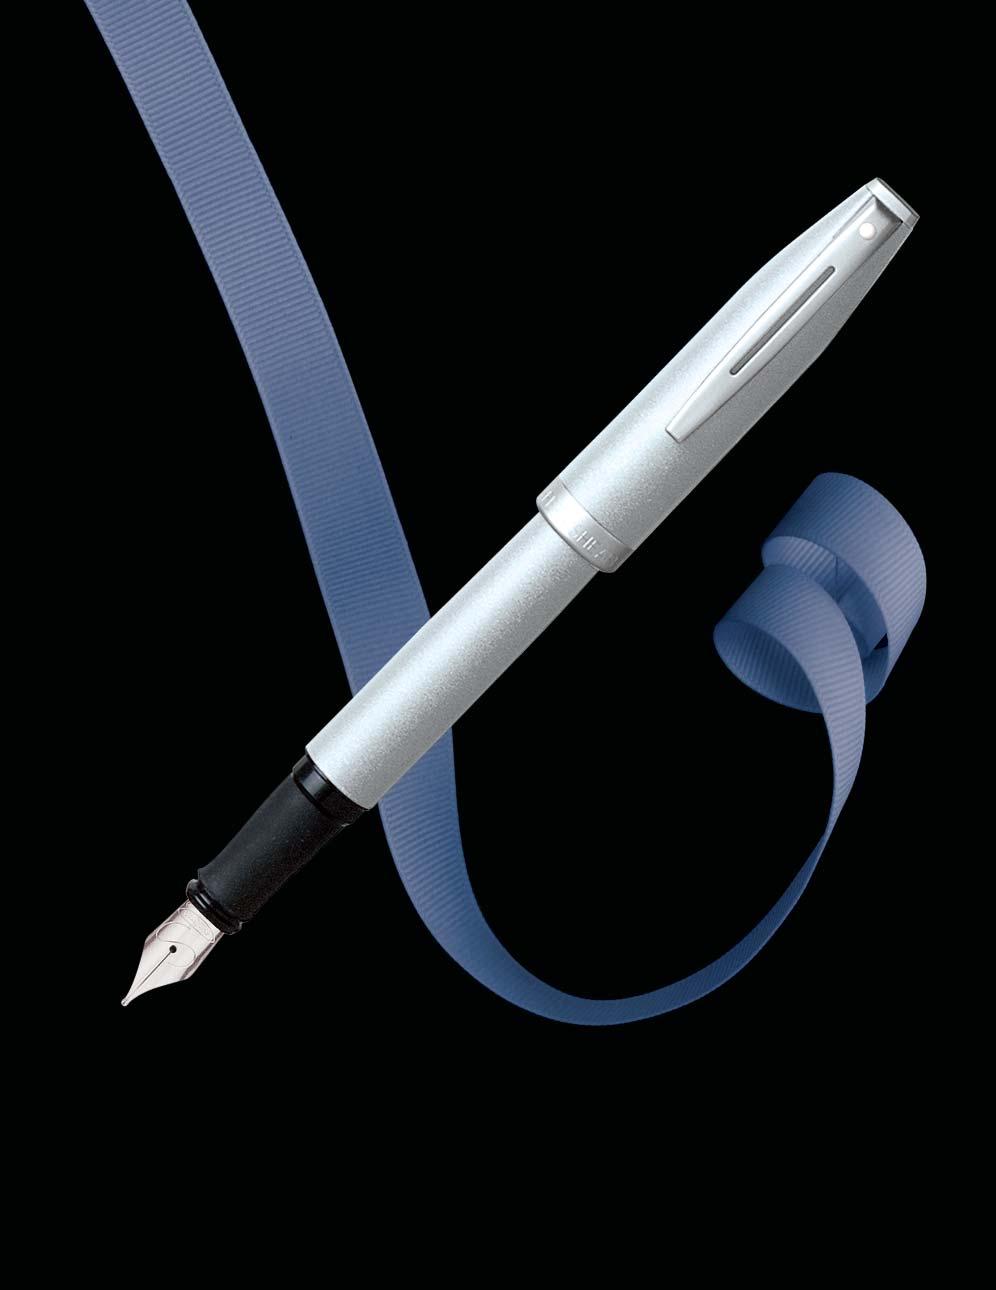 124 126 128 129 The Fusion of Form and Function Contemporary and stylish, Sheaffer Javelin writing instruments feature a distinctive round barrel,